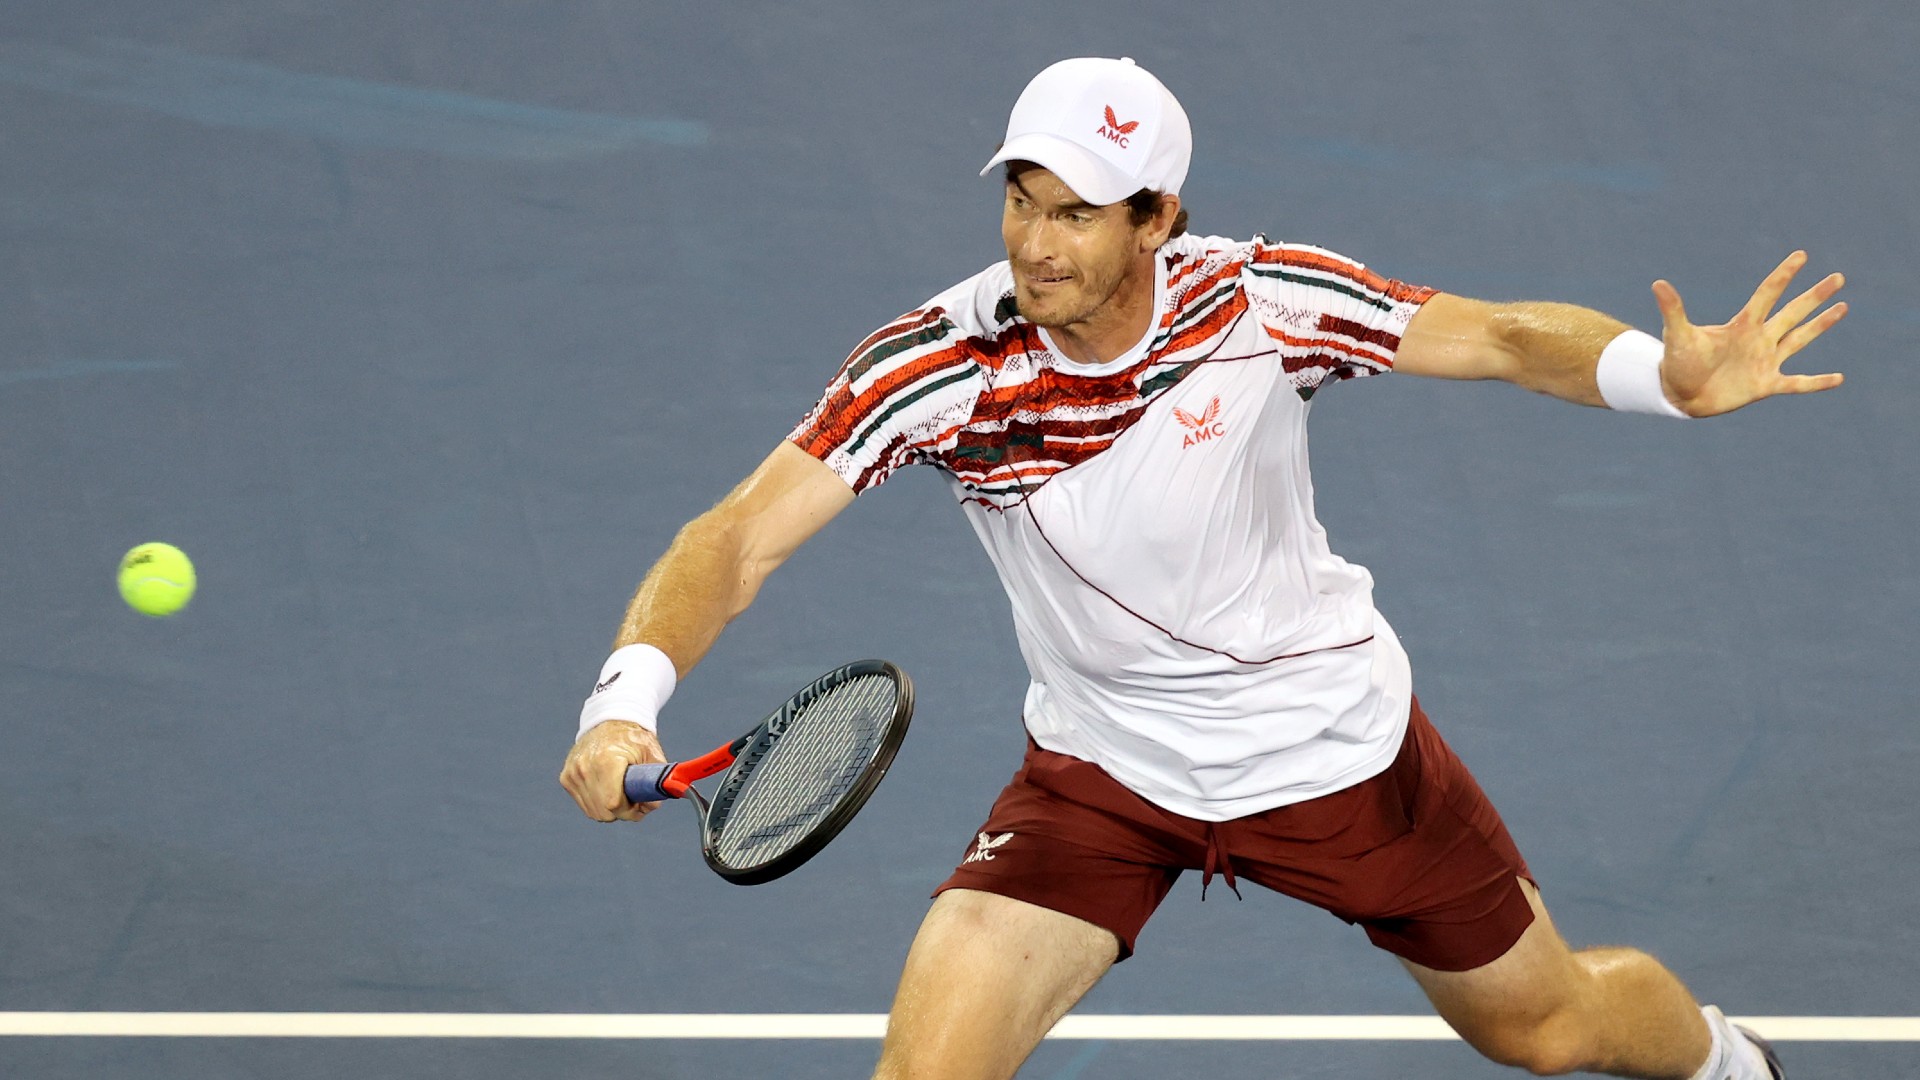 Andy Murray was impressive in his first singles match since Wimbledon, winning in straight sets in Cincinnati.